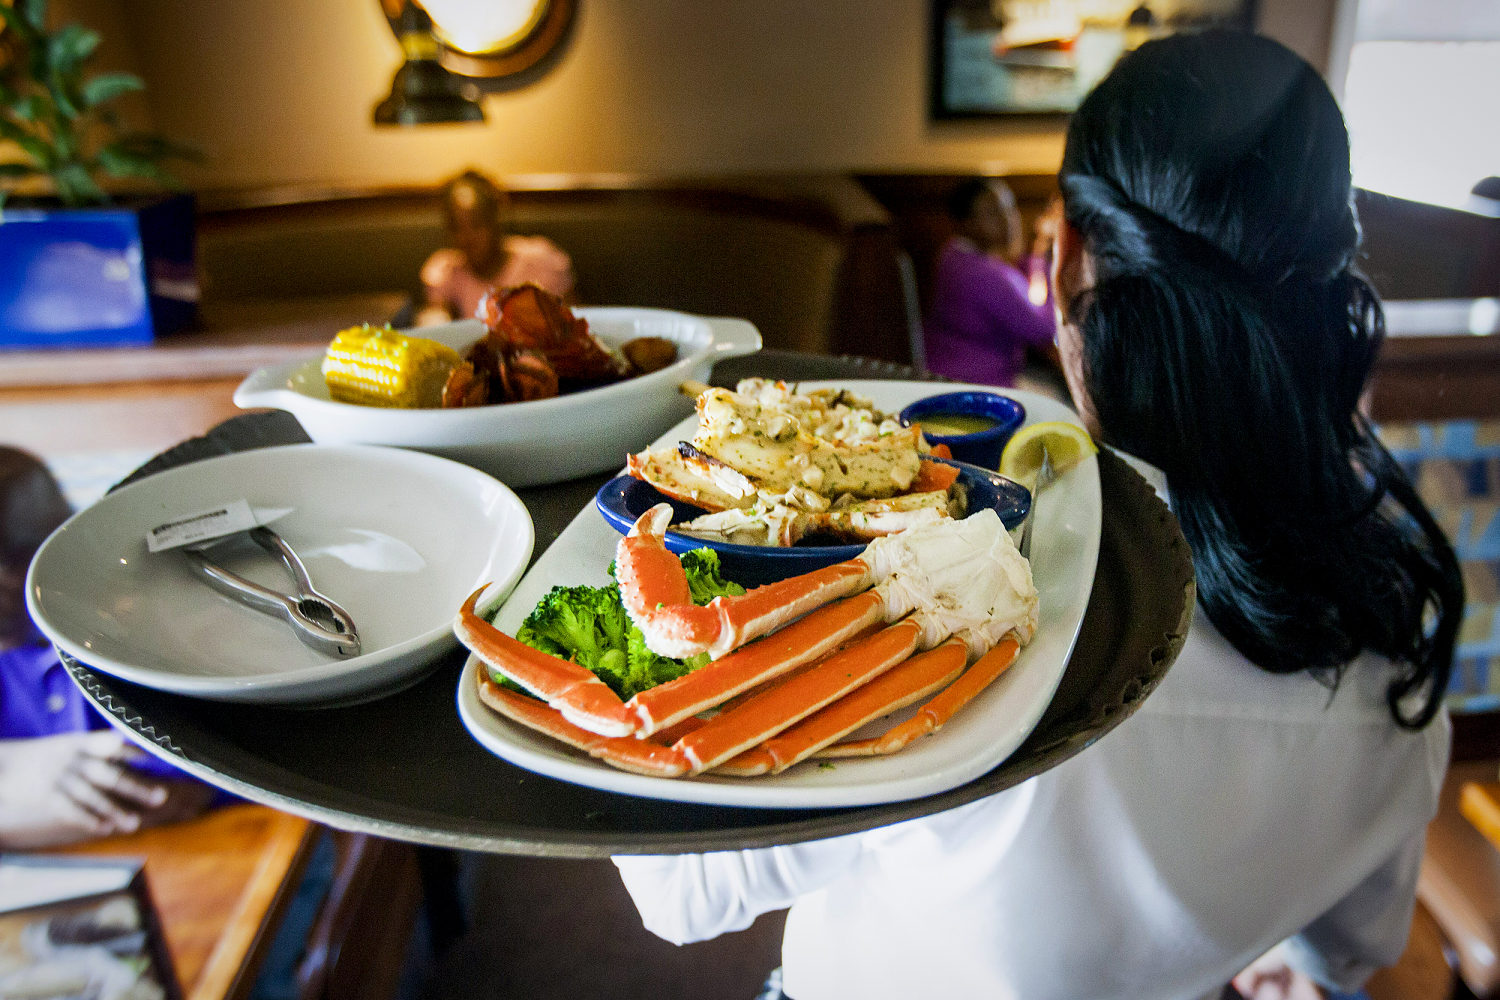 Why Red Lobster’s downfall hits differently for Black communities